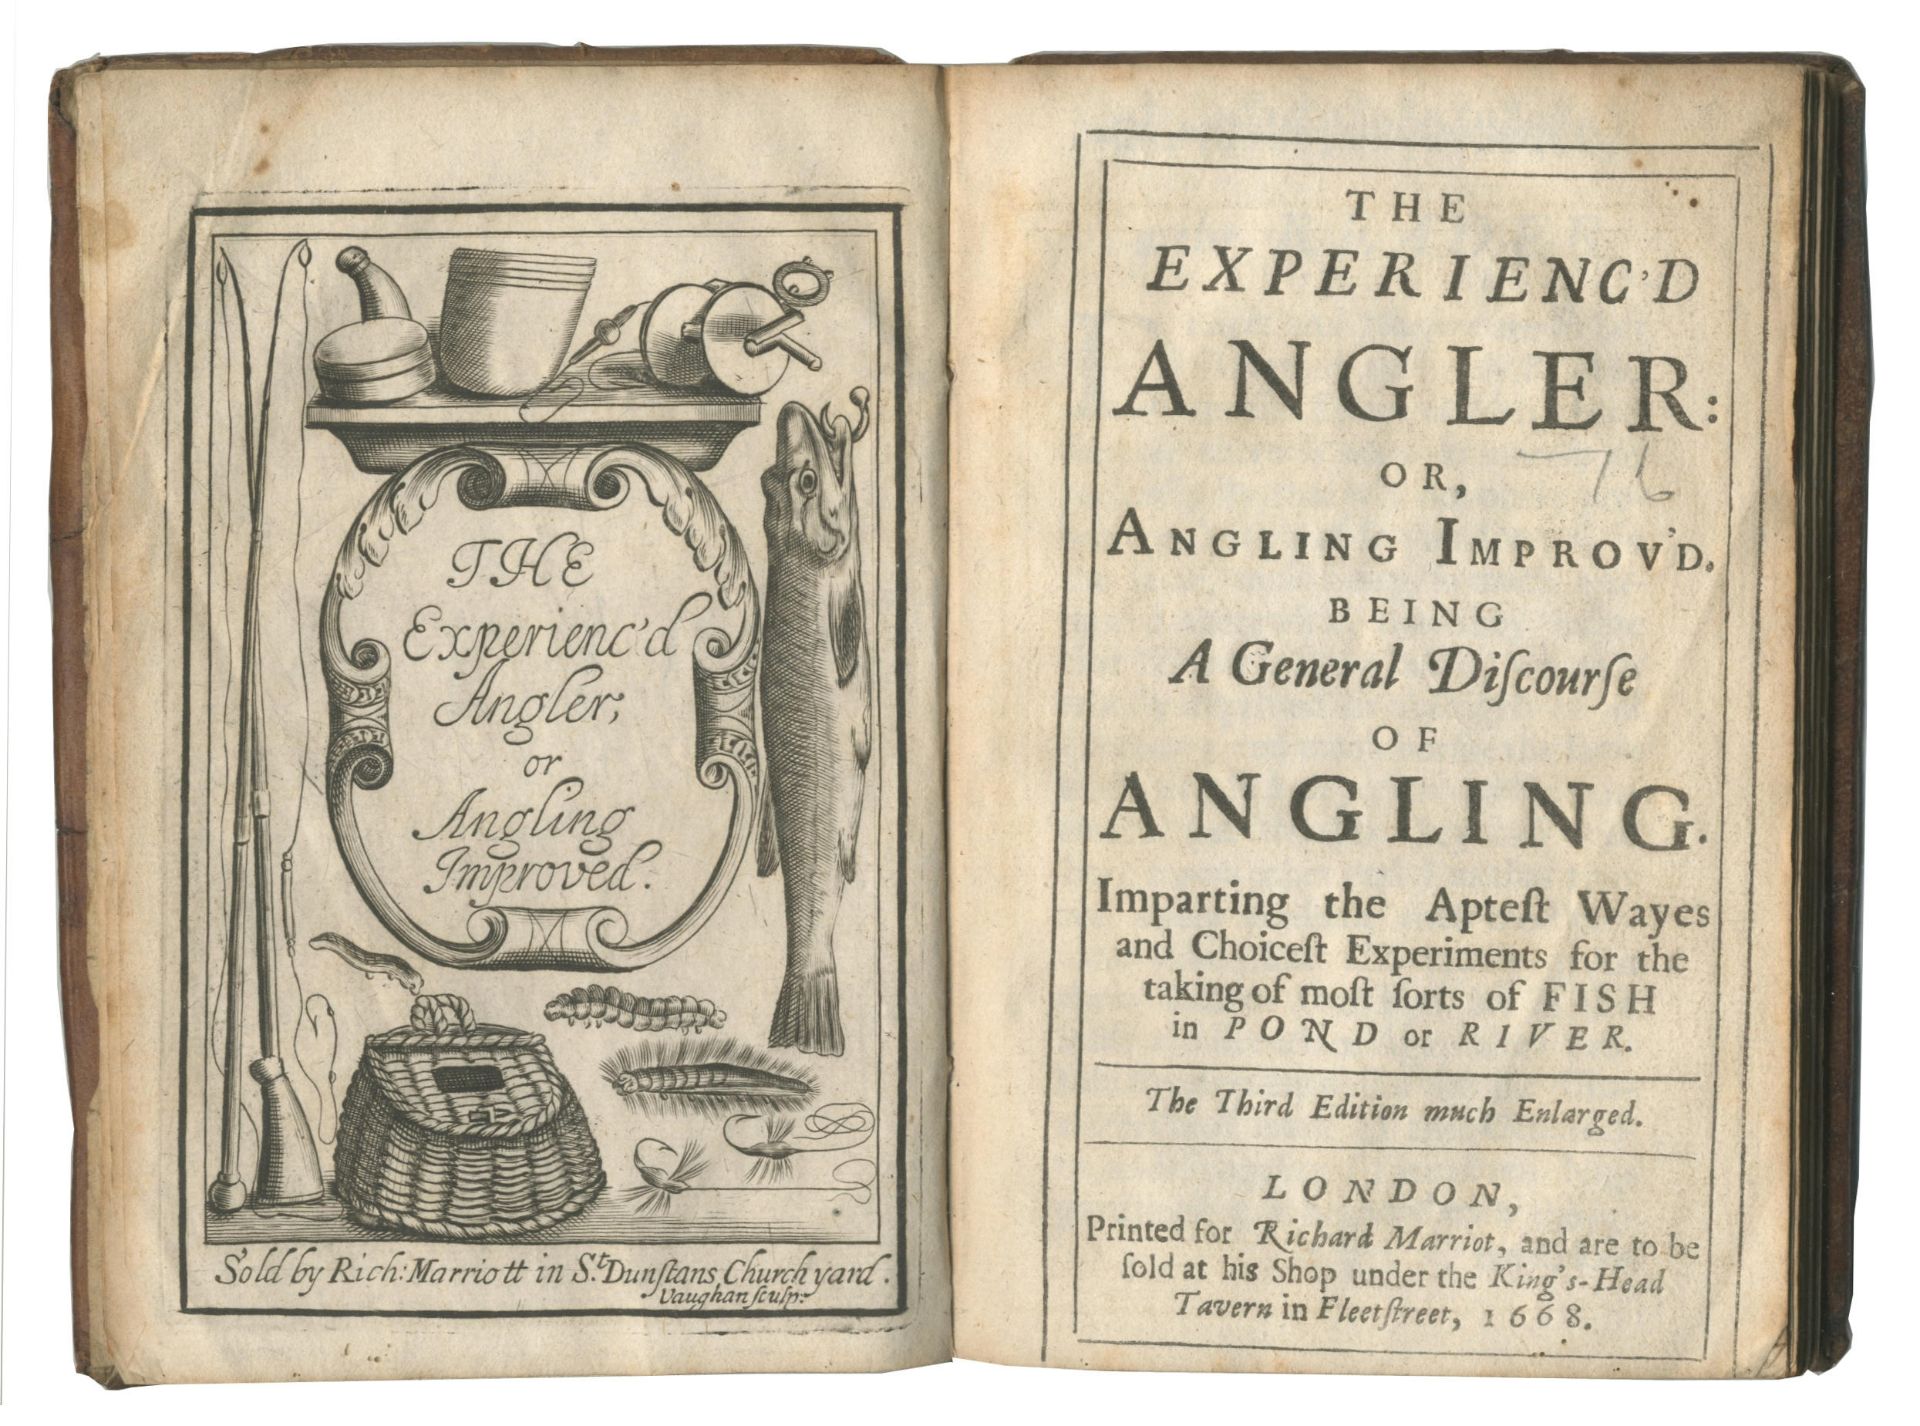 ANGLING VENABLES (ROBERT) The Experienc'd Angler: or Angling Improv'd, Richard Mariott, 1668